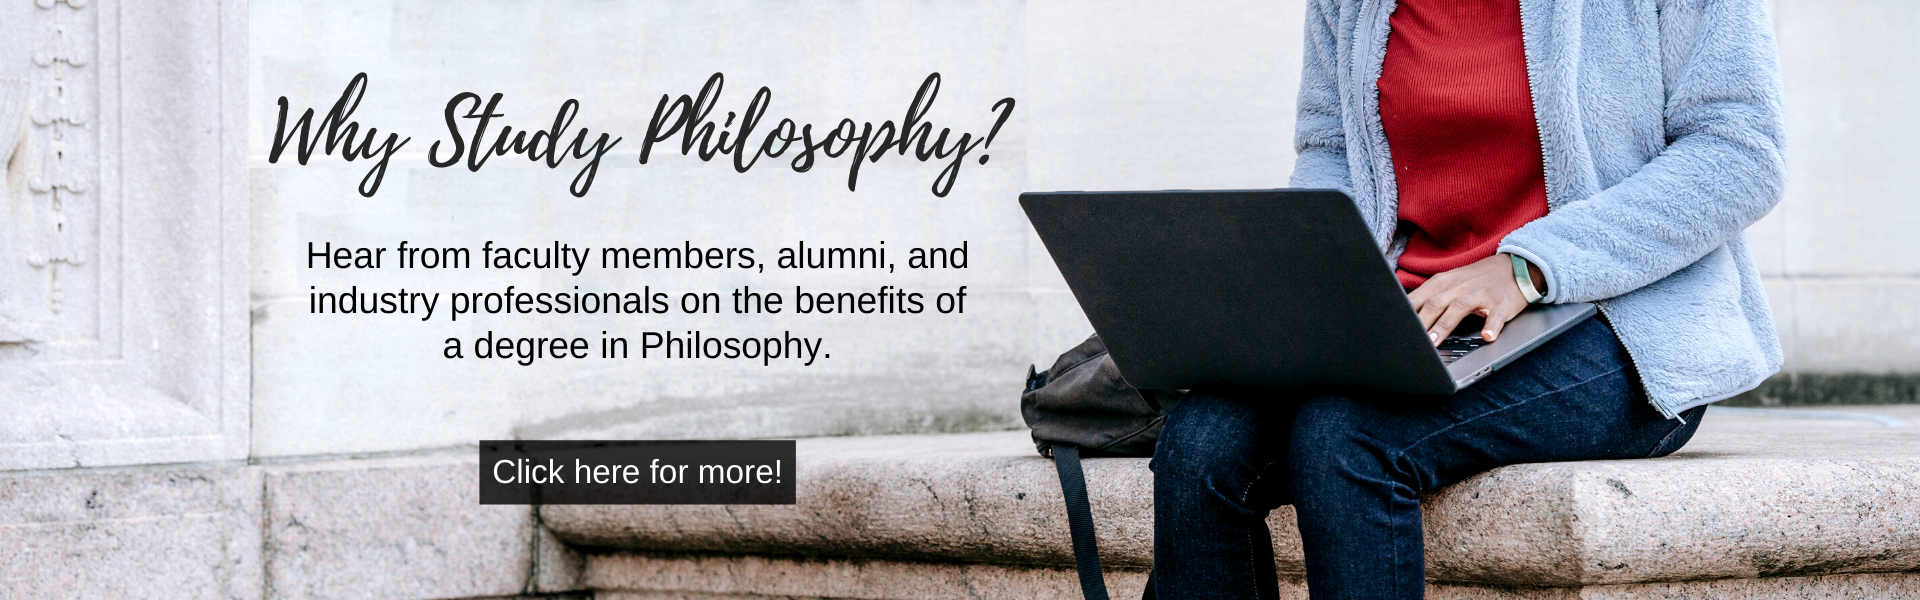 Why Study Philosophy? Click here to hear the benefits of a philosophy degree from faculty members, alumni, and industry professionals